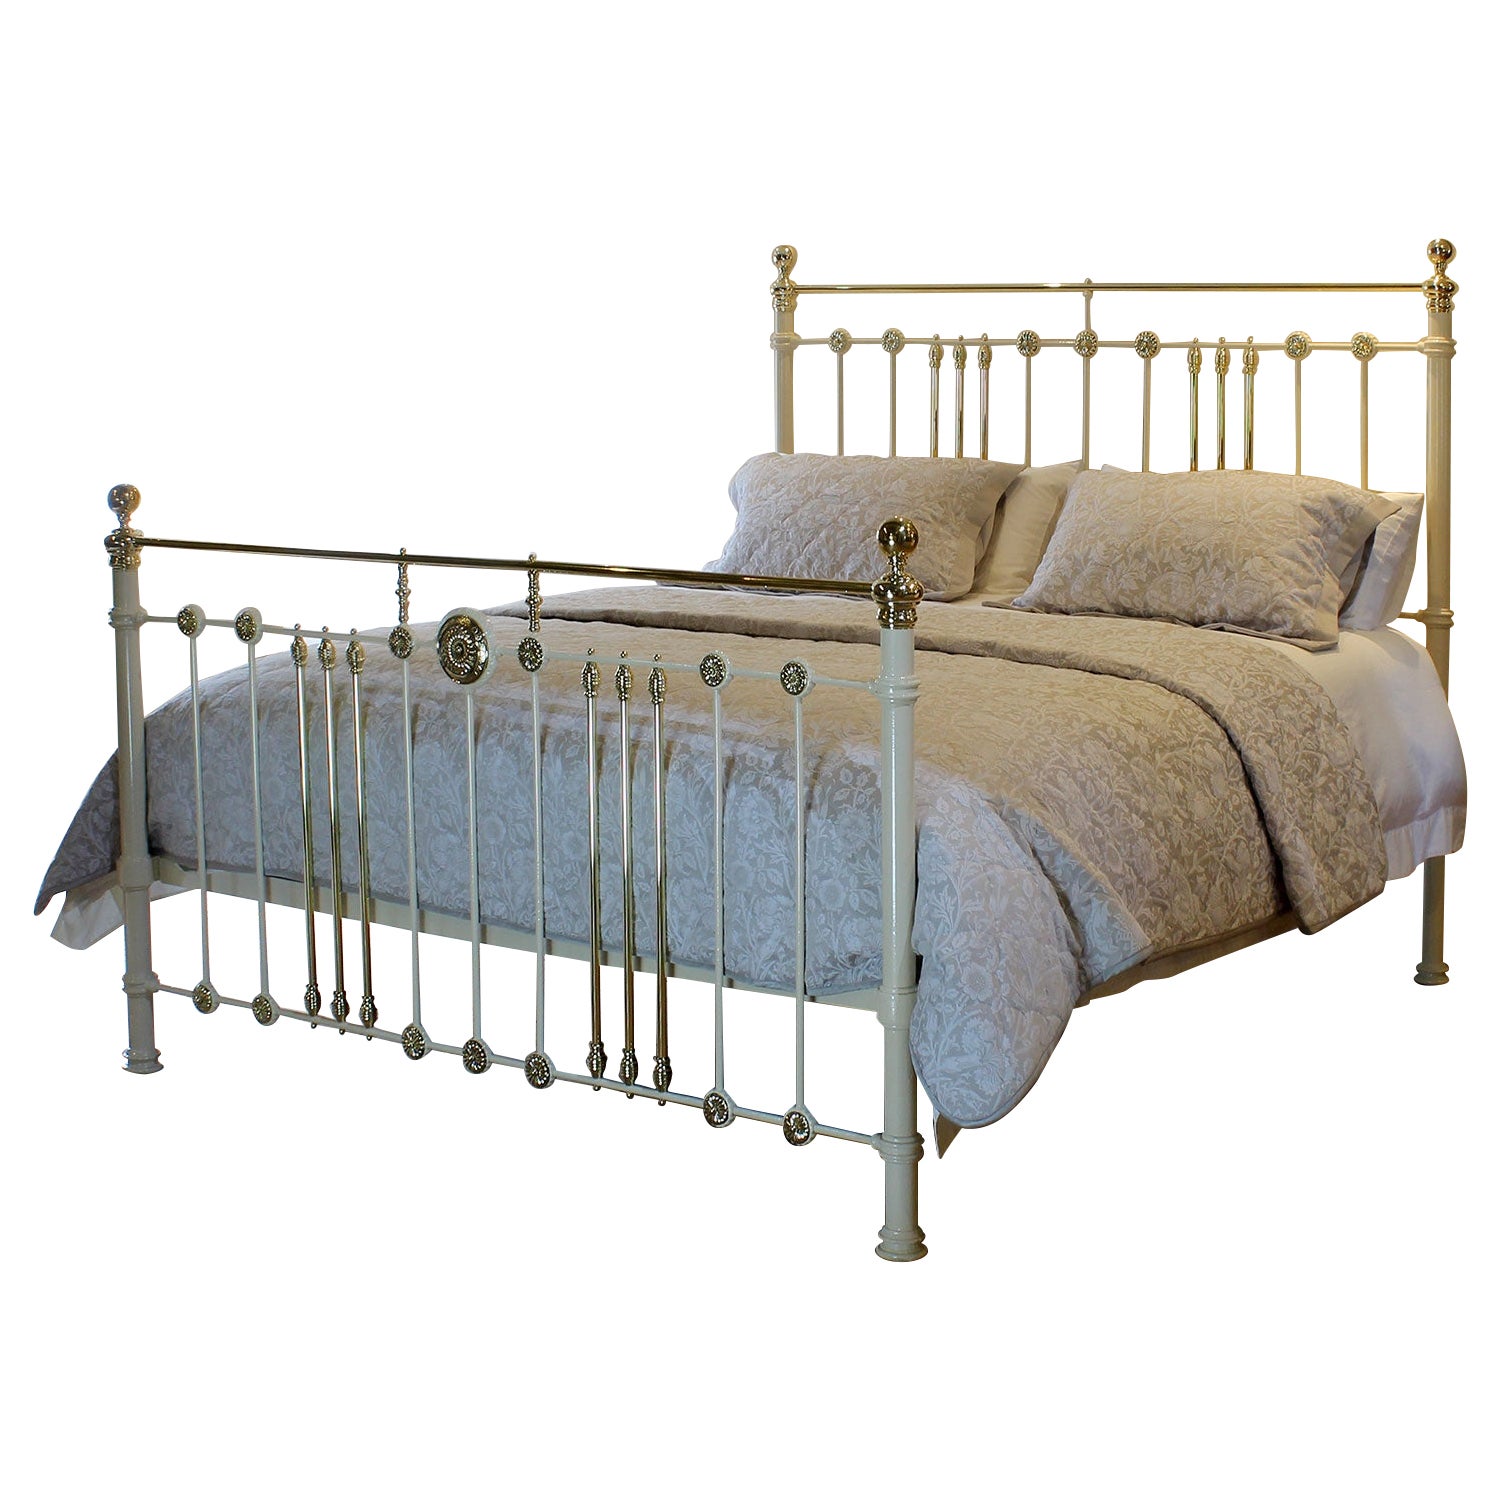 Extra Wide Brass and Iron Antique Bed in Cream with Rosette Decoration, MSK81